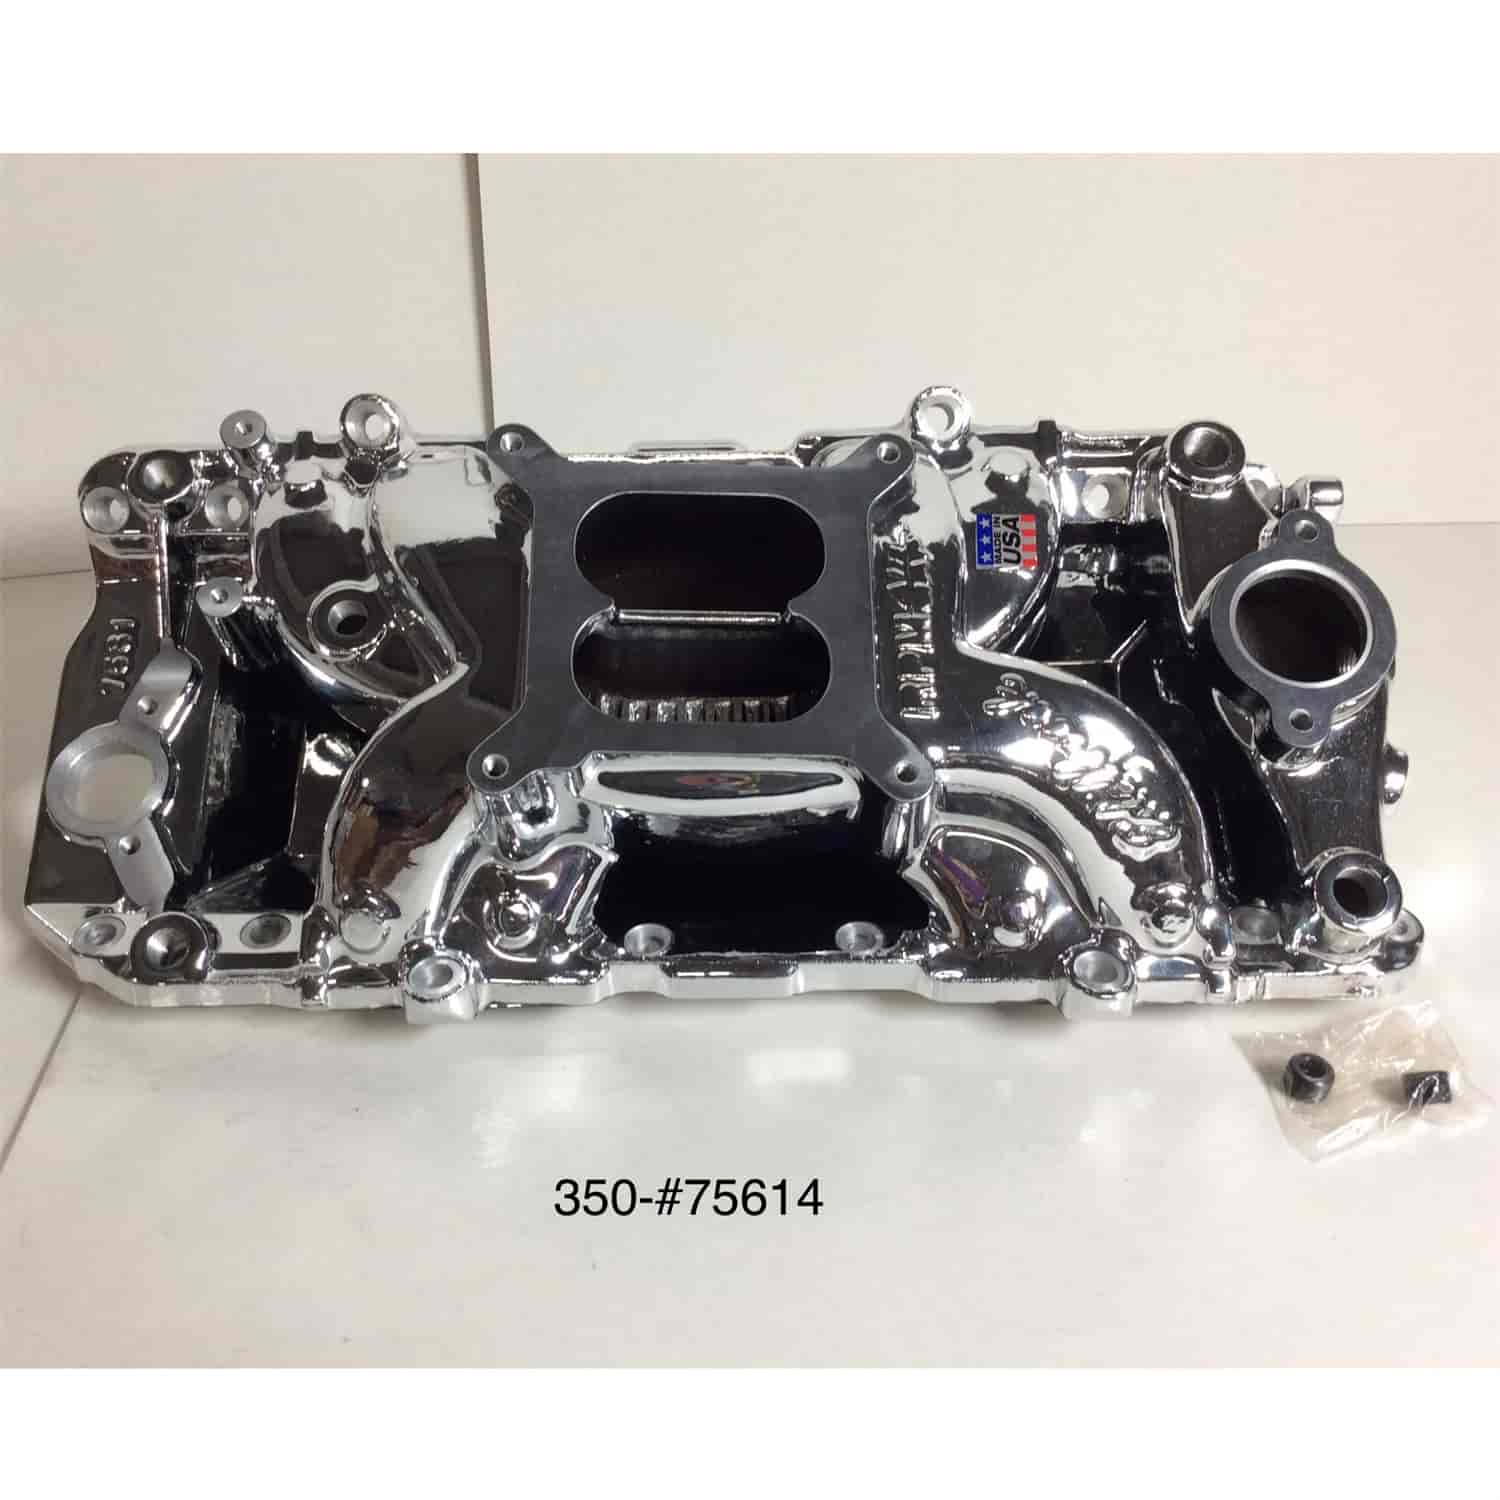 *BLEMISHED* RPM Air-Gap 2-O Intake Manifold BB-Chevy 396-502 with oval port cylinder heads